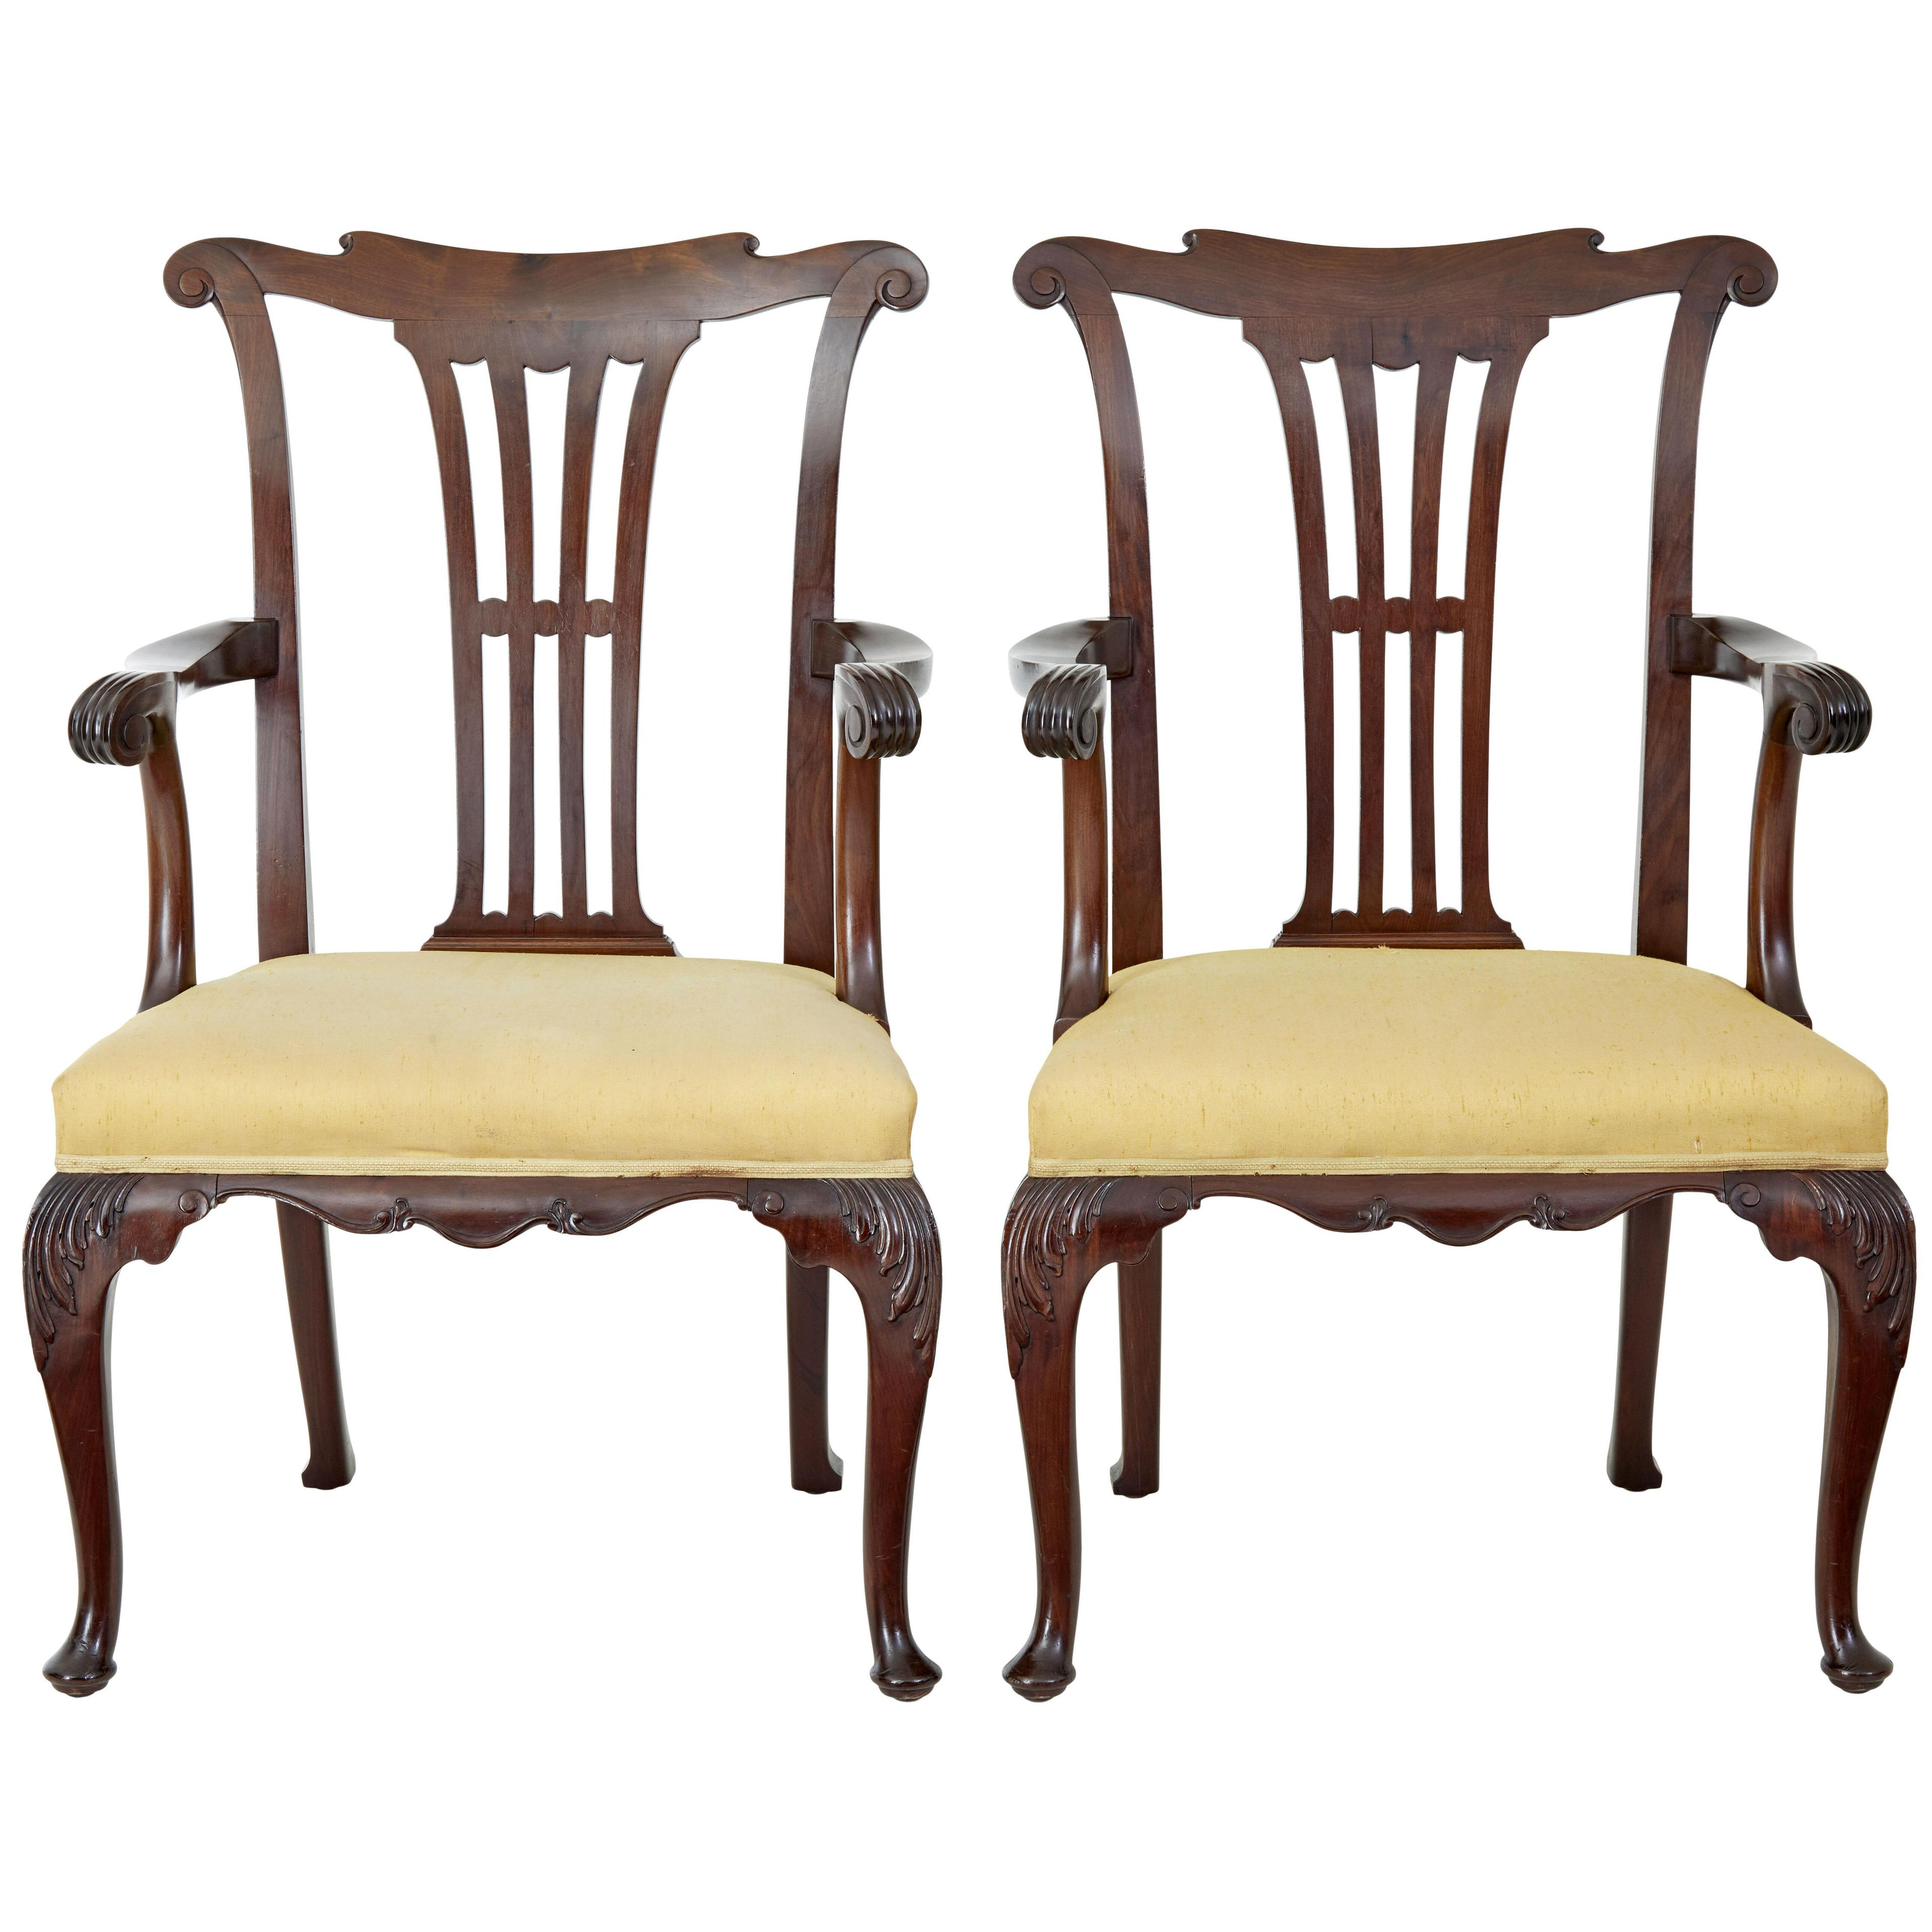 PAIR OF 19TH CENTURY CHIPPENDALE DESIGN MAHOGANY ARMCHAIRS